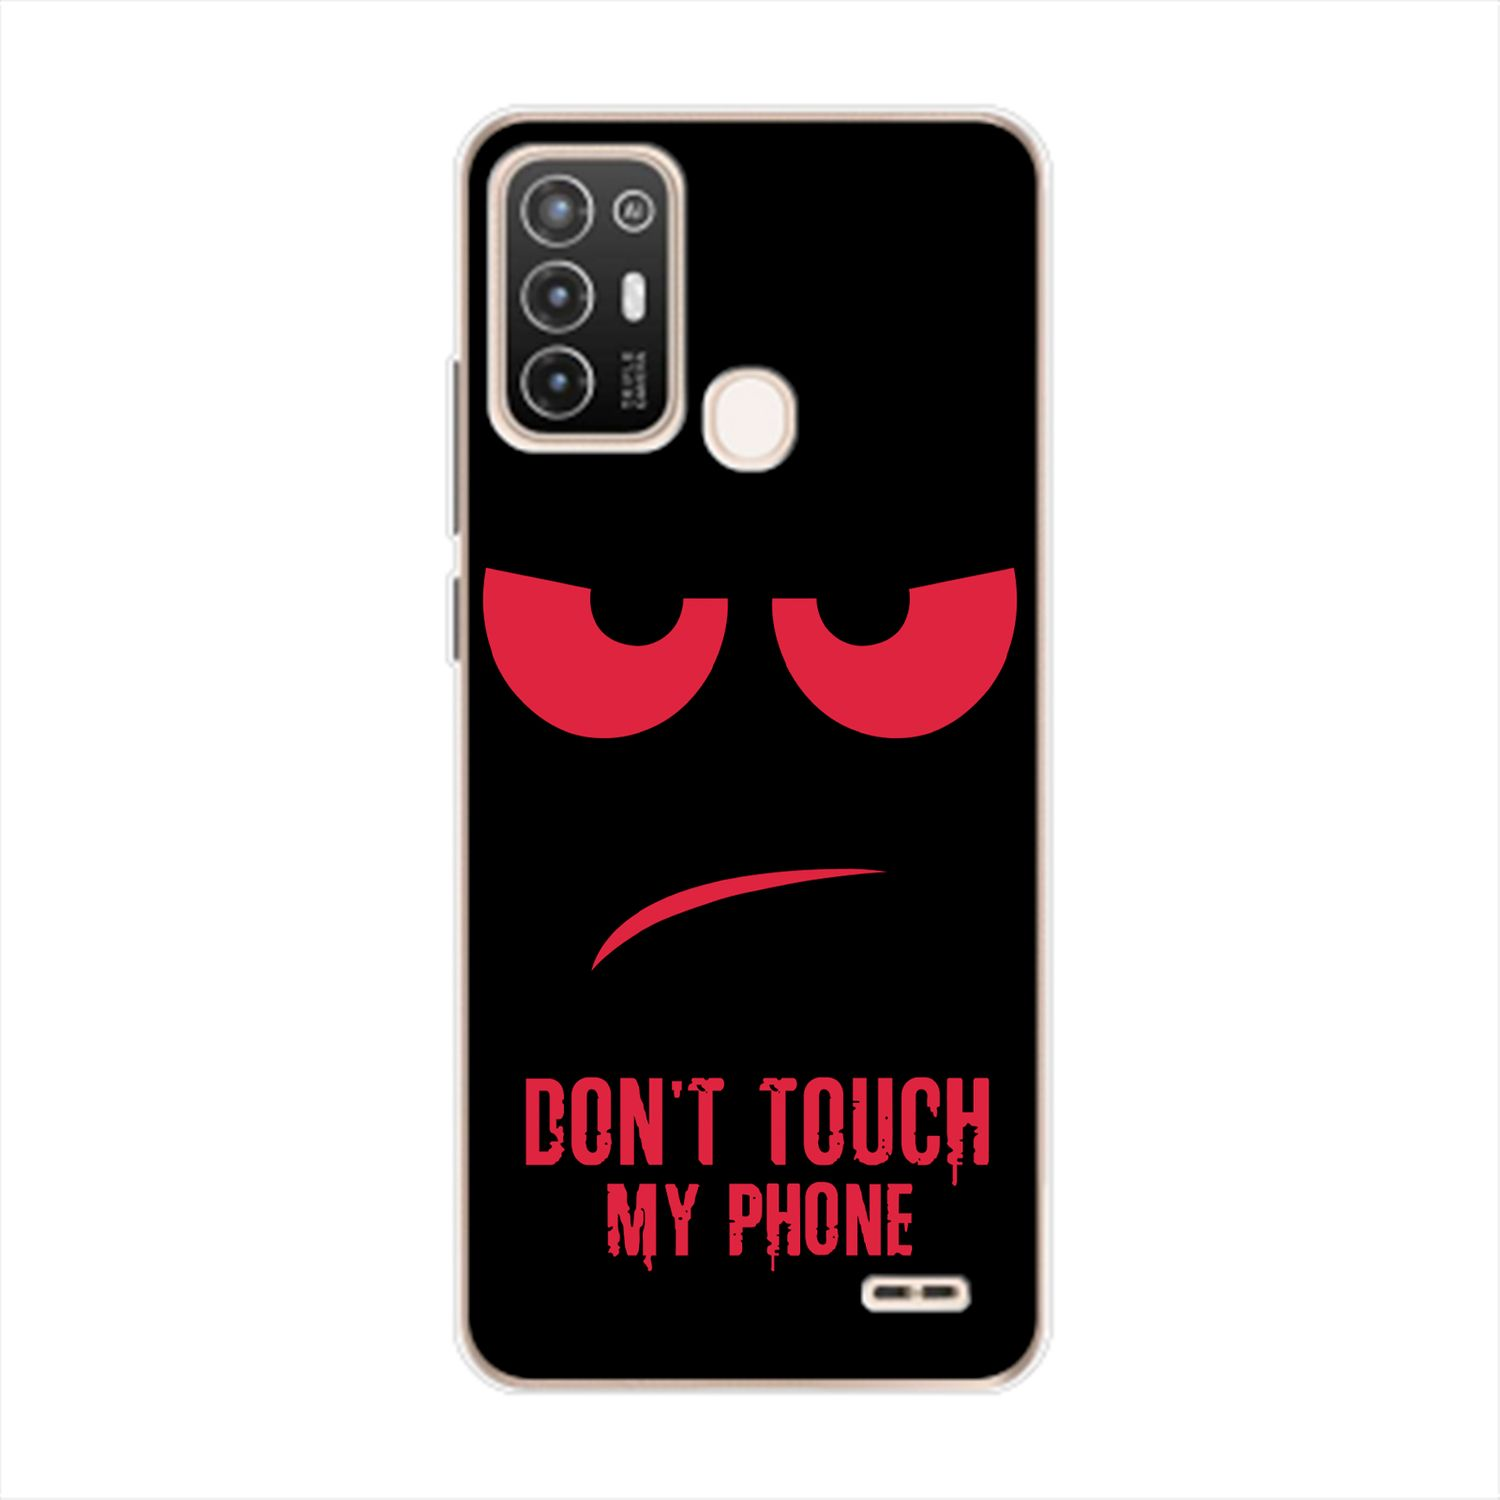 KÖNIG DESIGN Case, Backcover, ZTE, Blade My A52, Rot Phone Touch Dont